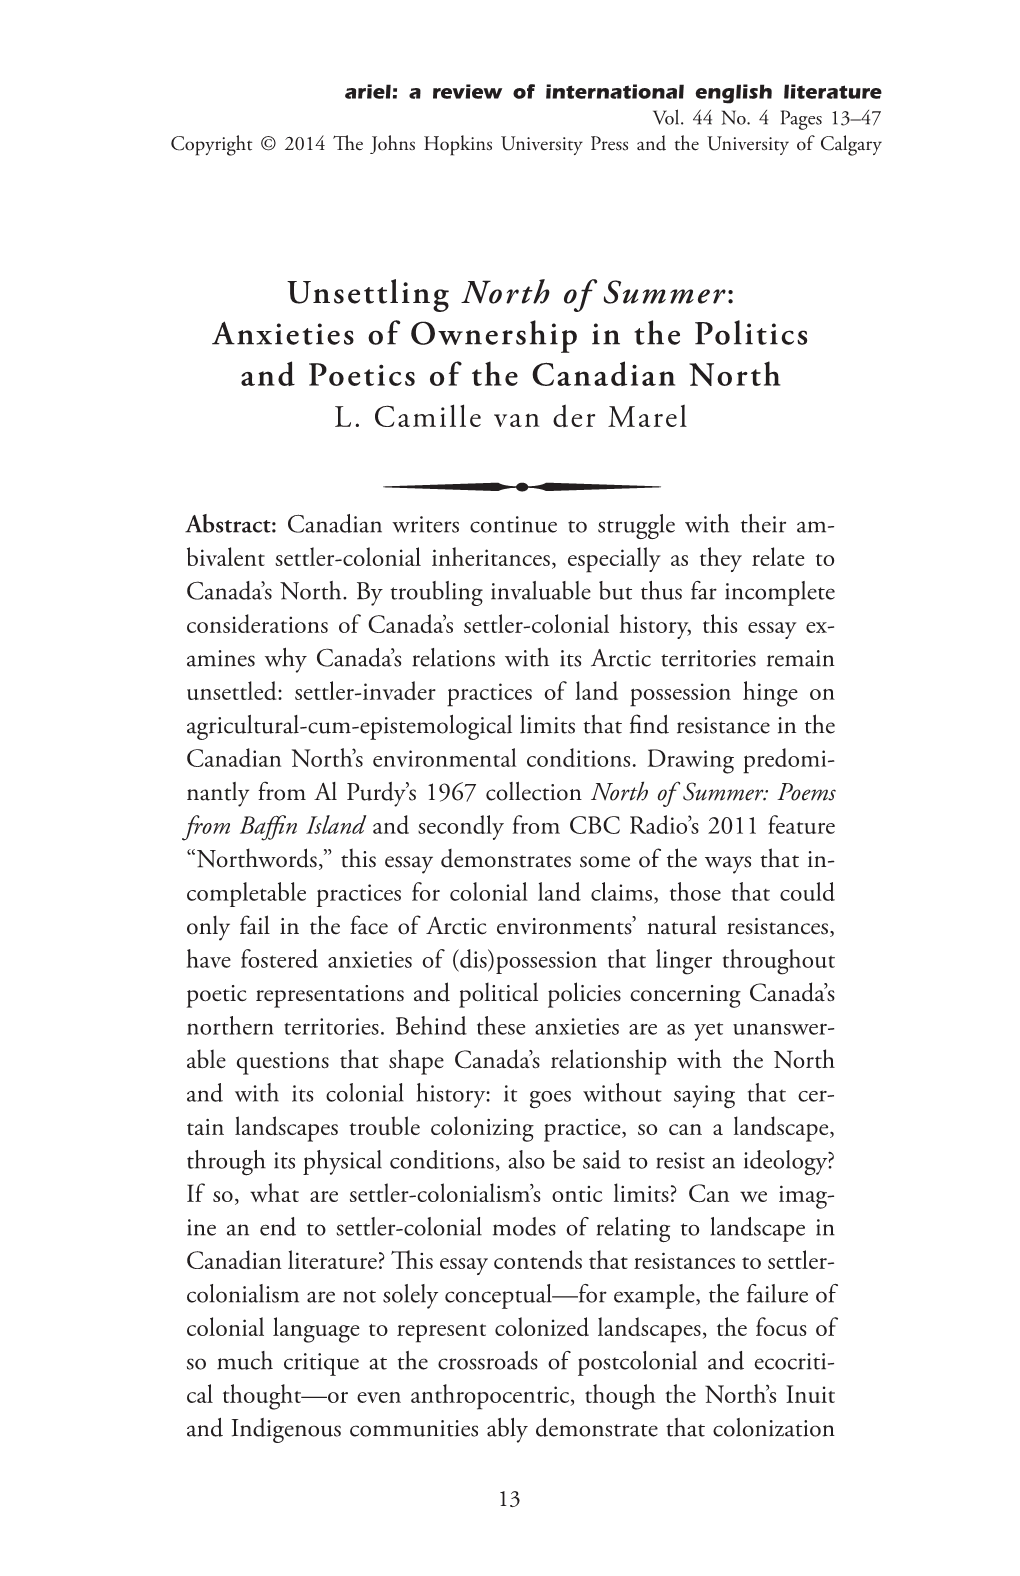 Anxieties of Ownership in the Politics and Poetics of the Canadian North L